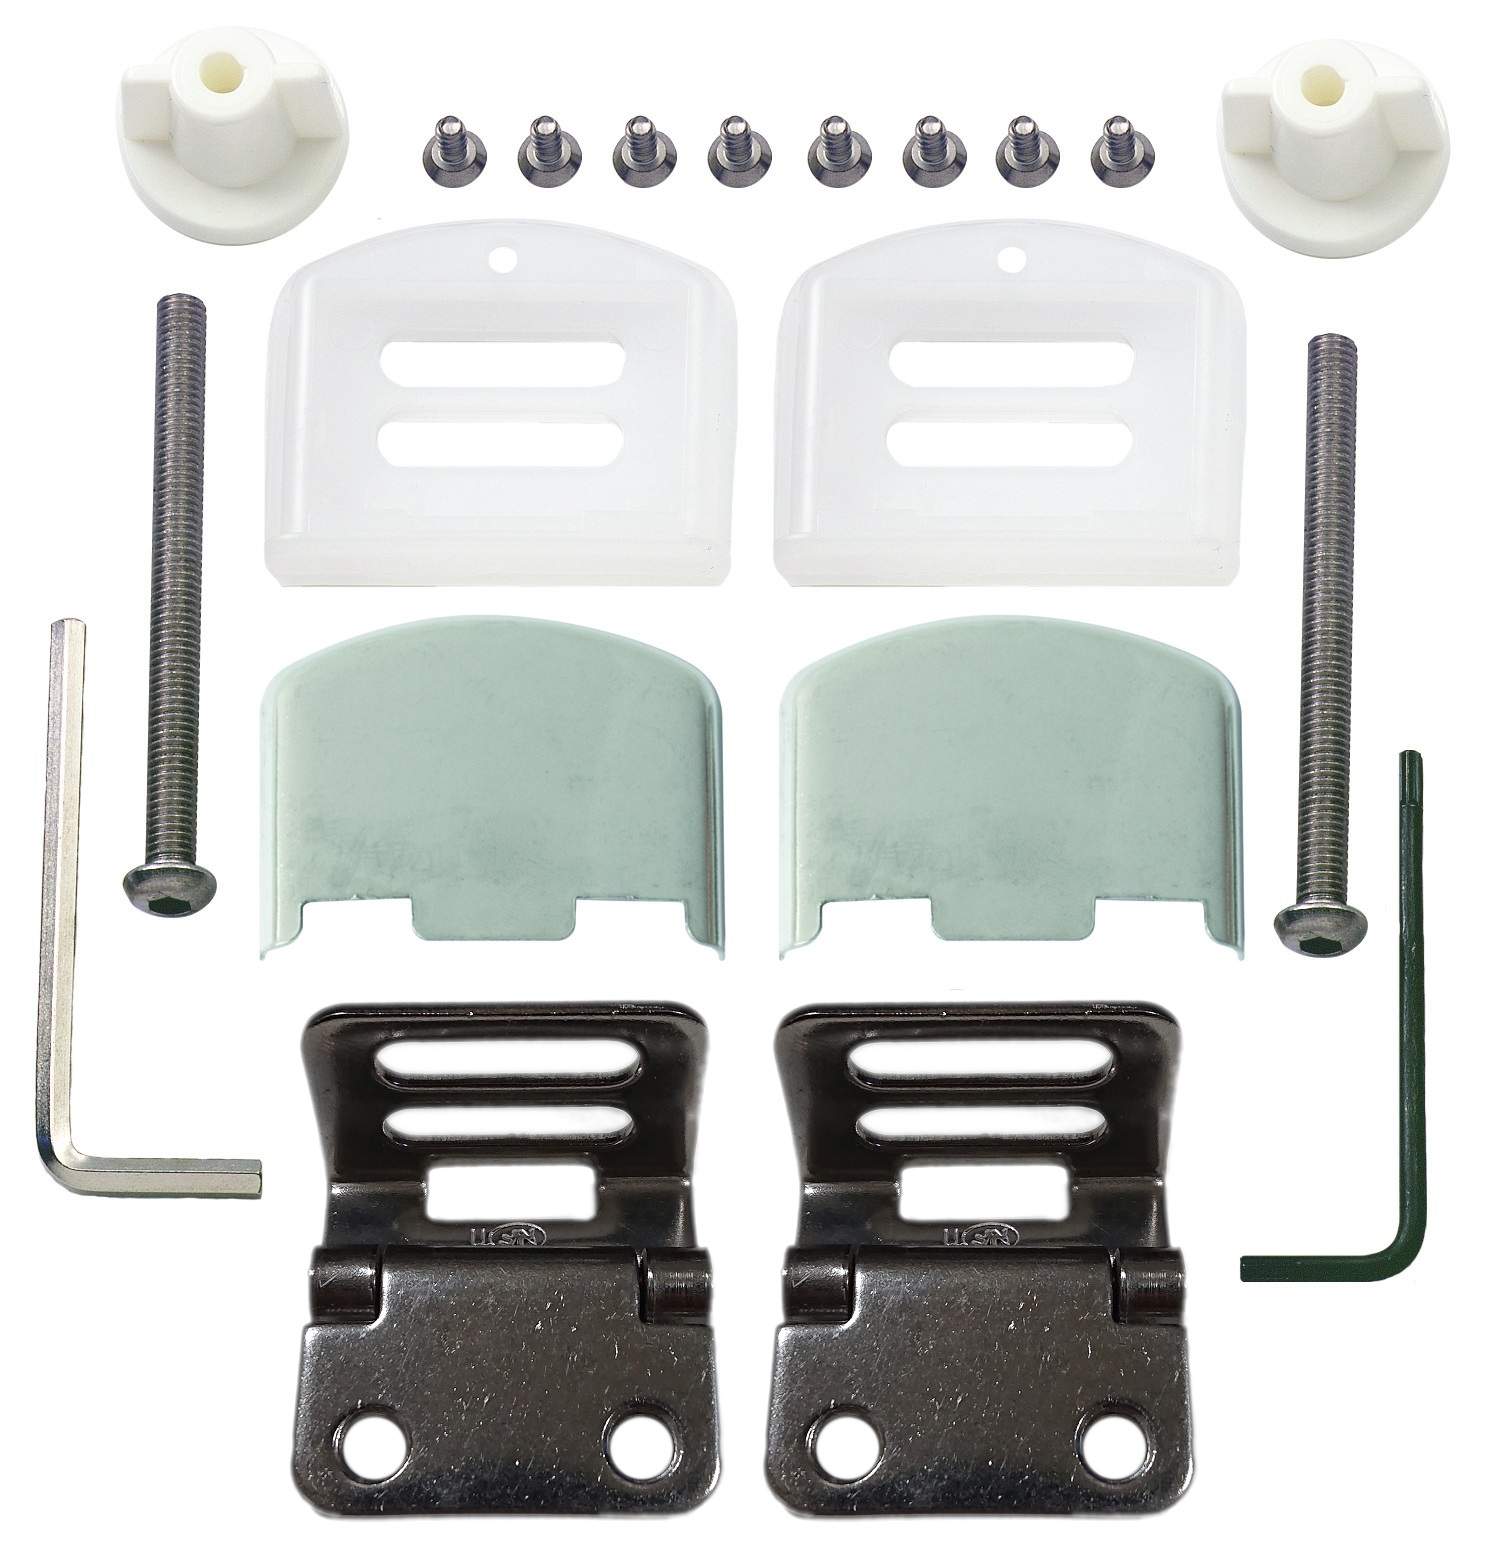 Single hinge kit with stainless steel covers and screws